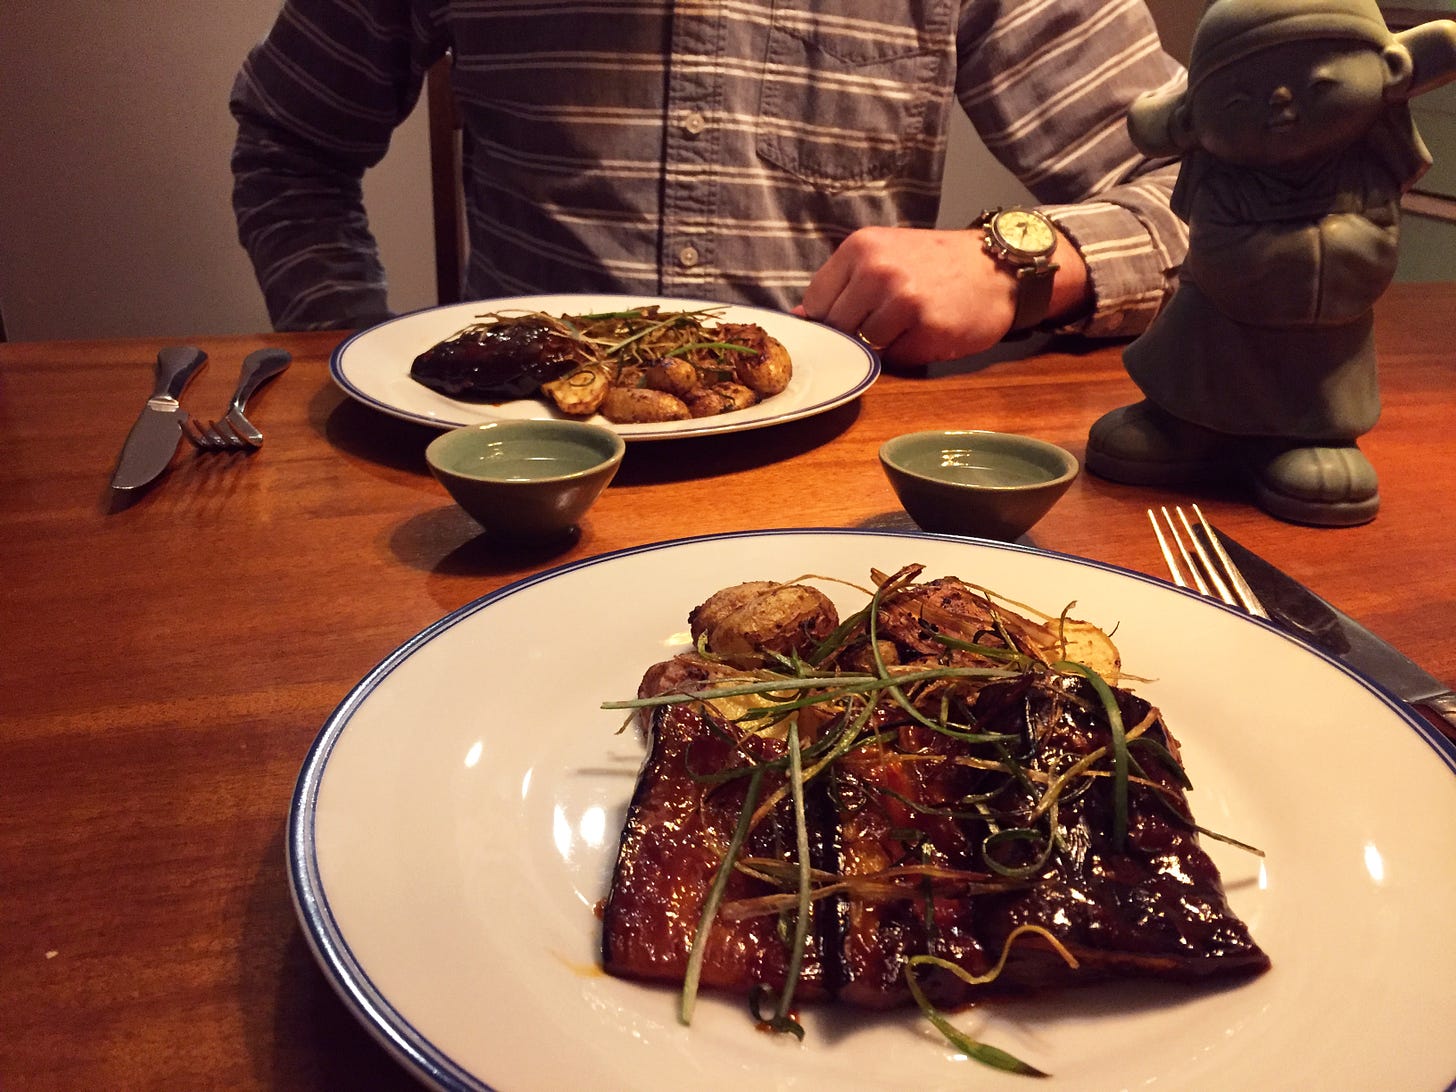 Two plates with large slices of eggplant covered in a dark red, sticky glaze, arranged overlapping a pile of small fingerling potatoes. On top are long thin slices of crisp green onion. Two mint green cups of soju sit between the plates, and just visible in the right corner is a matching ceramic bottle with a human shape.